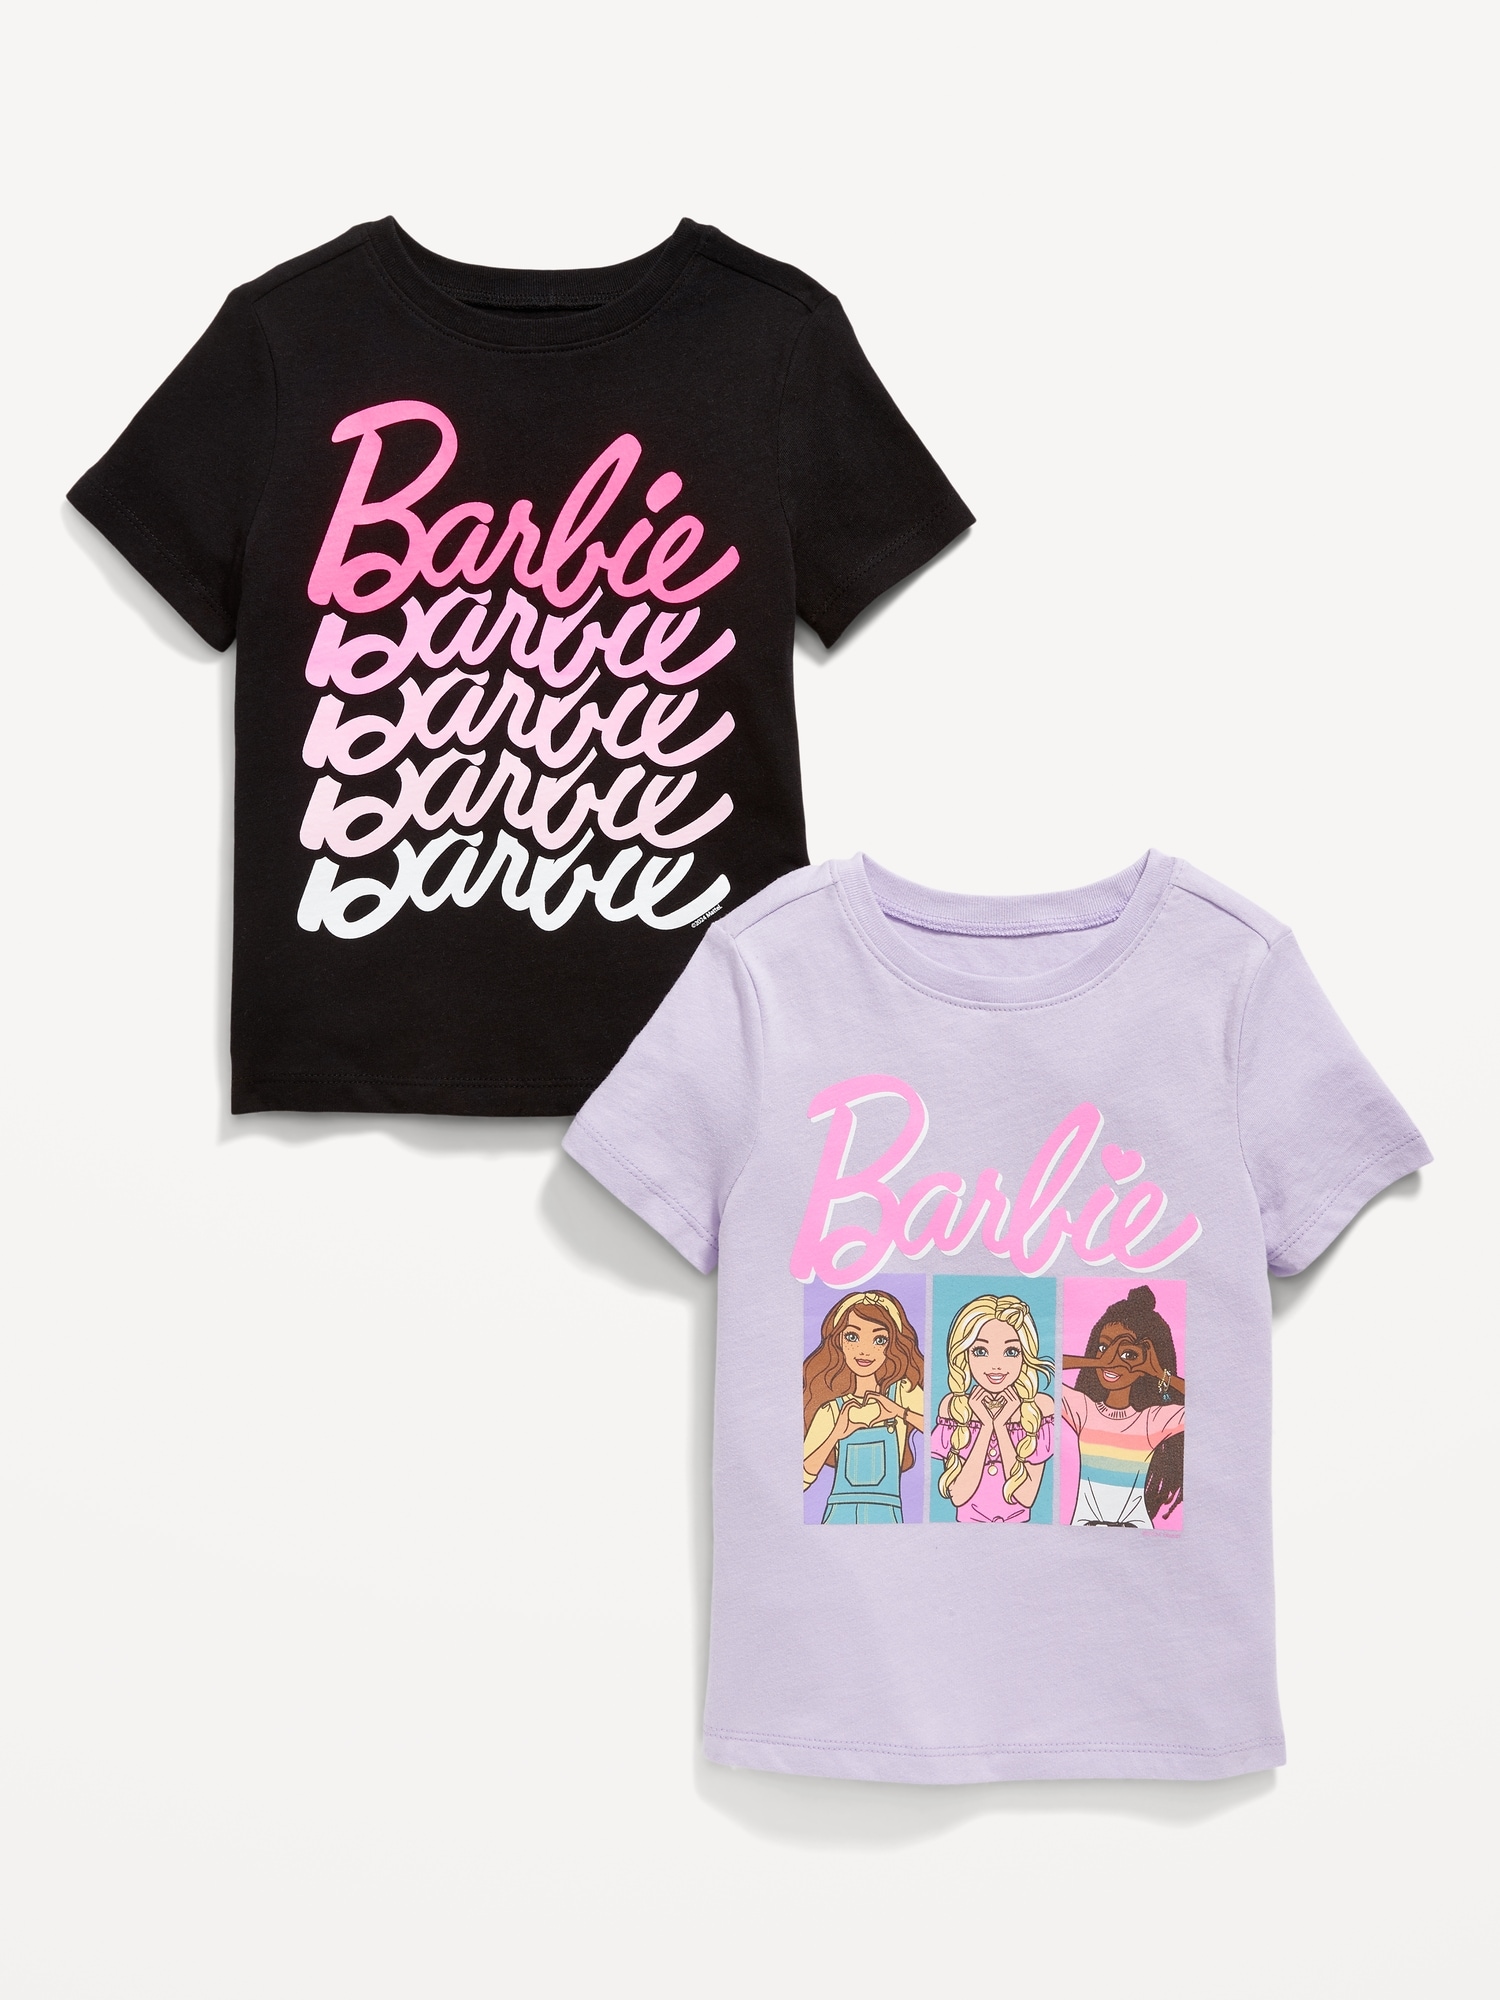 Barbie Unisex Graphic T-Shirt 2-Pack for Toddler Hot Deal